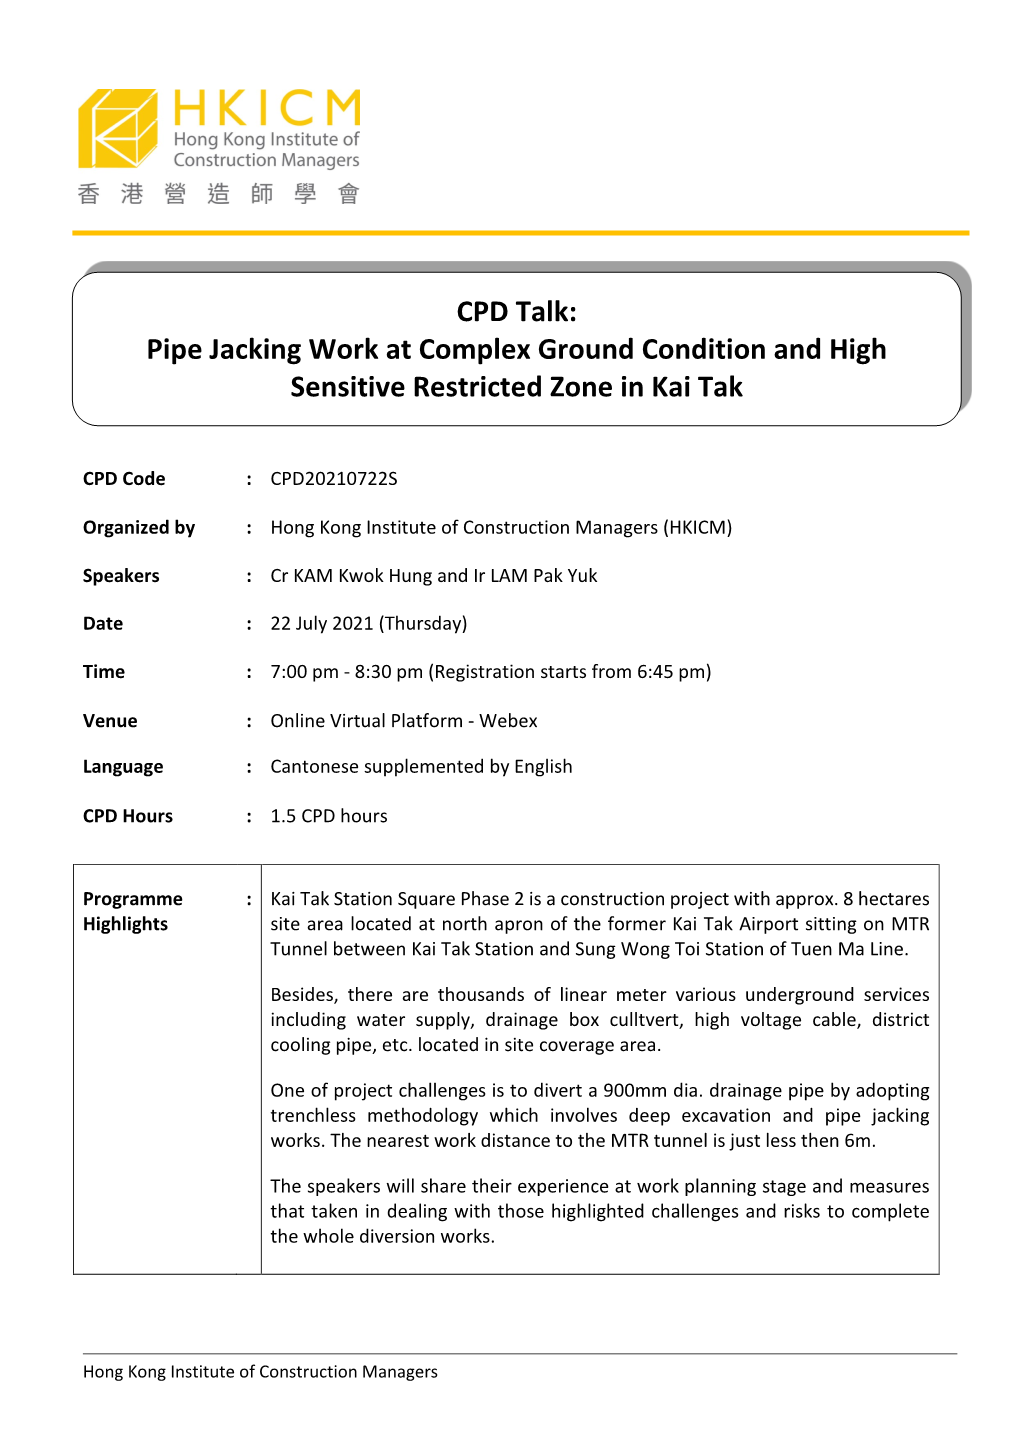 CPD Talk: Pipe Jacking Work at Complex Ground Condition and High Sensitive Restricted Zone in Kai Tak